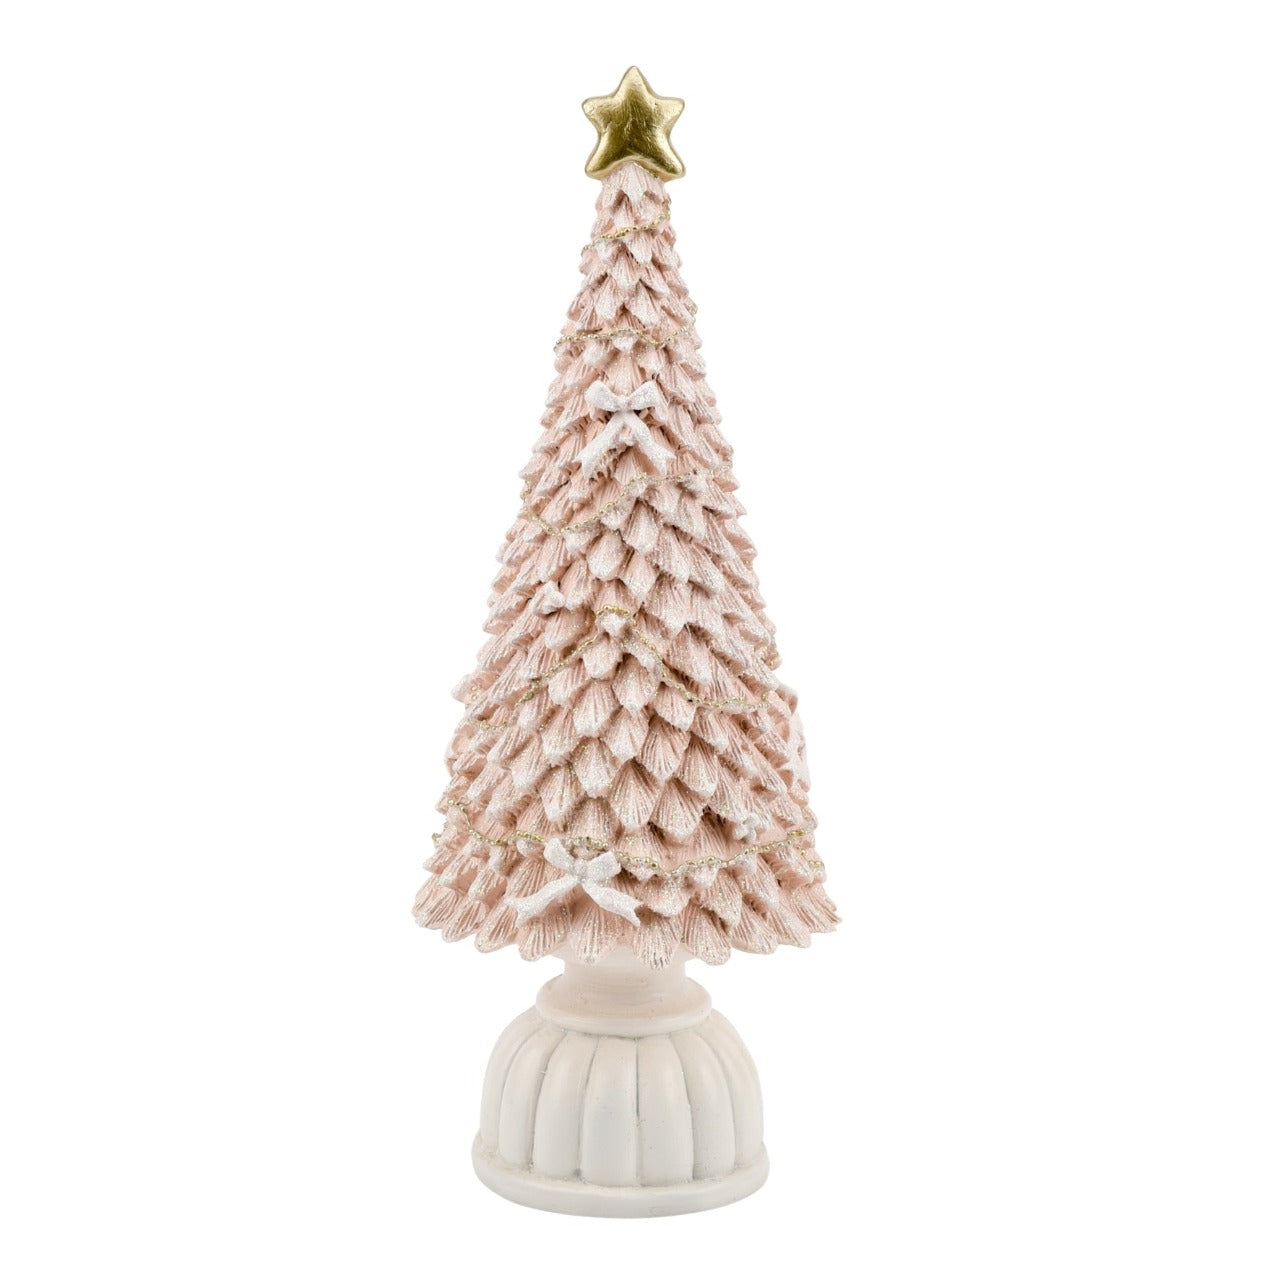 Pink Christmas Tree Figurine  Enter a world of relaxation, luxury and sophistication with a Christmas so simple yet tasteful. Step away from the traditions and enjoy a stylish champagne theme with Refined Elegance; subtle blush pinks with shimmering golds and sparkling crystals.